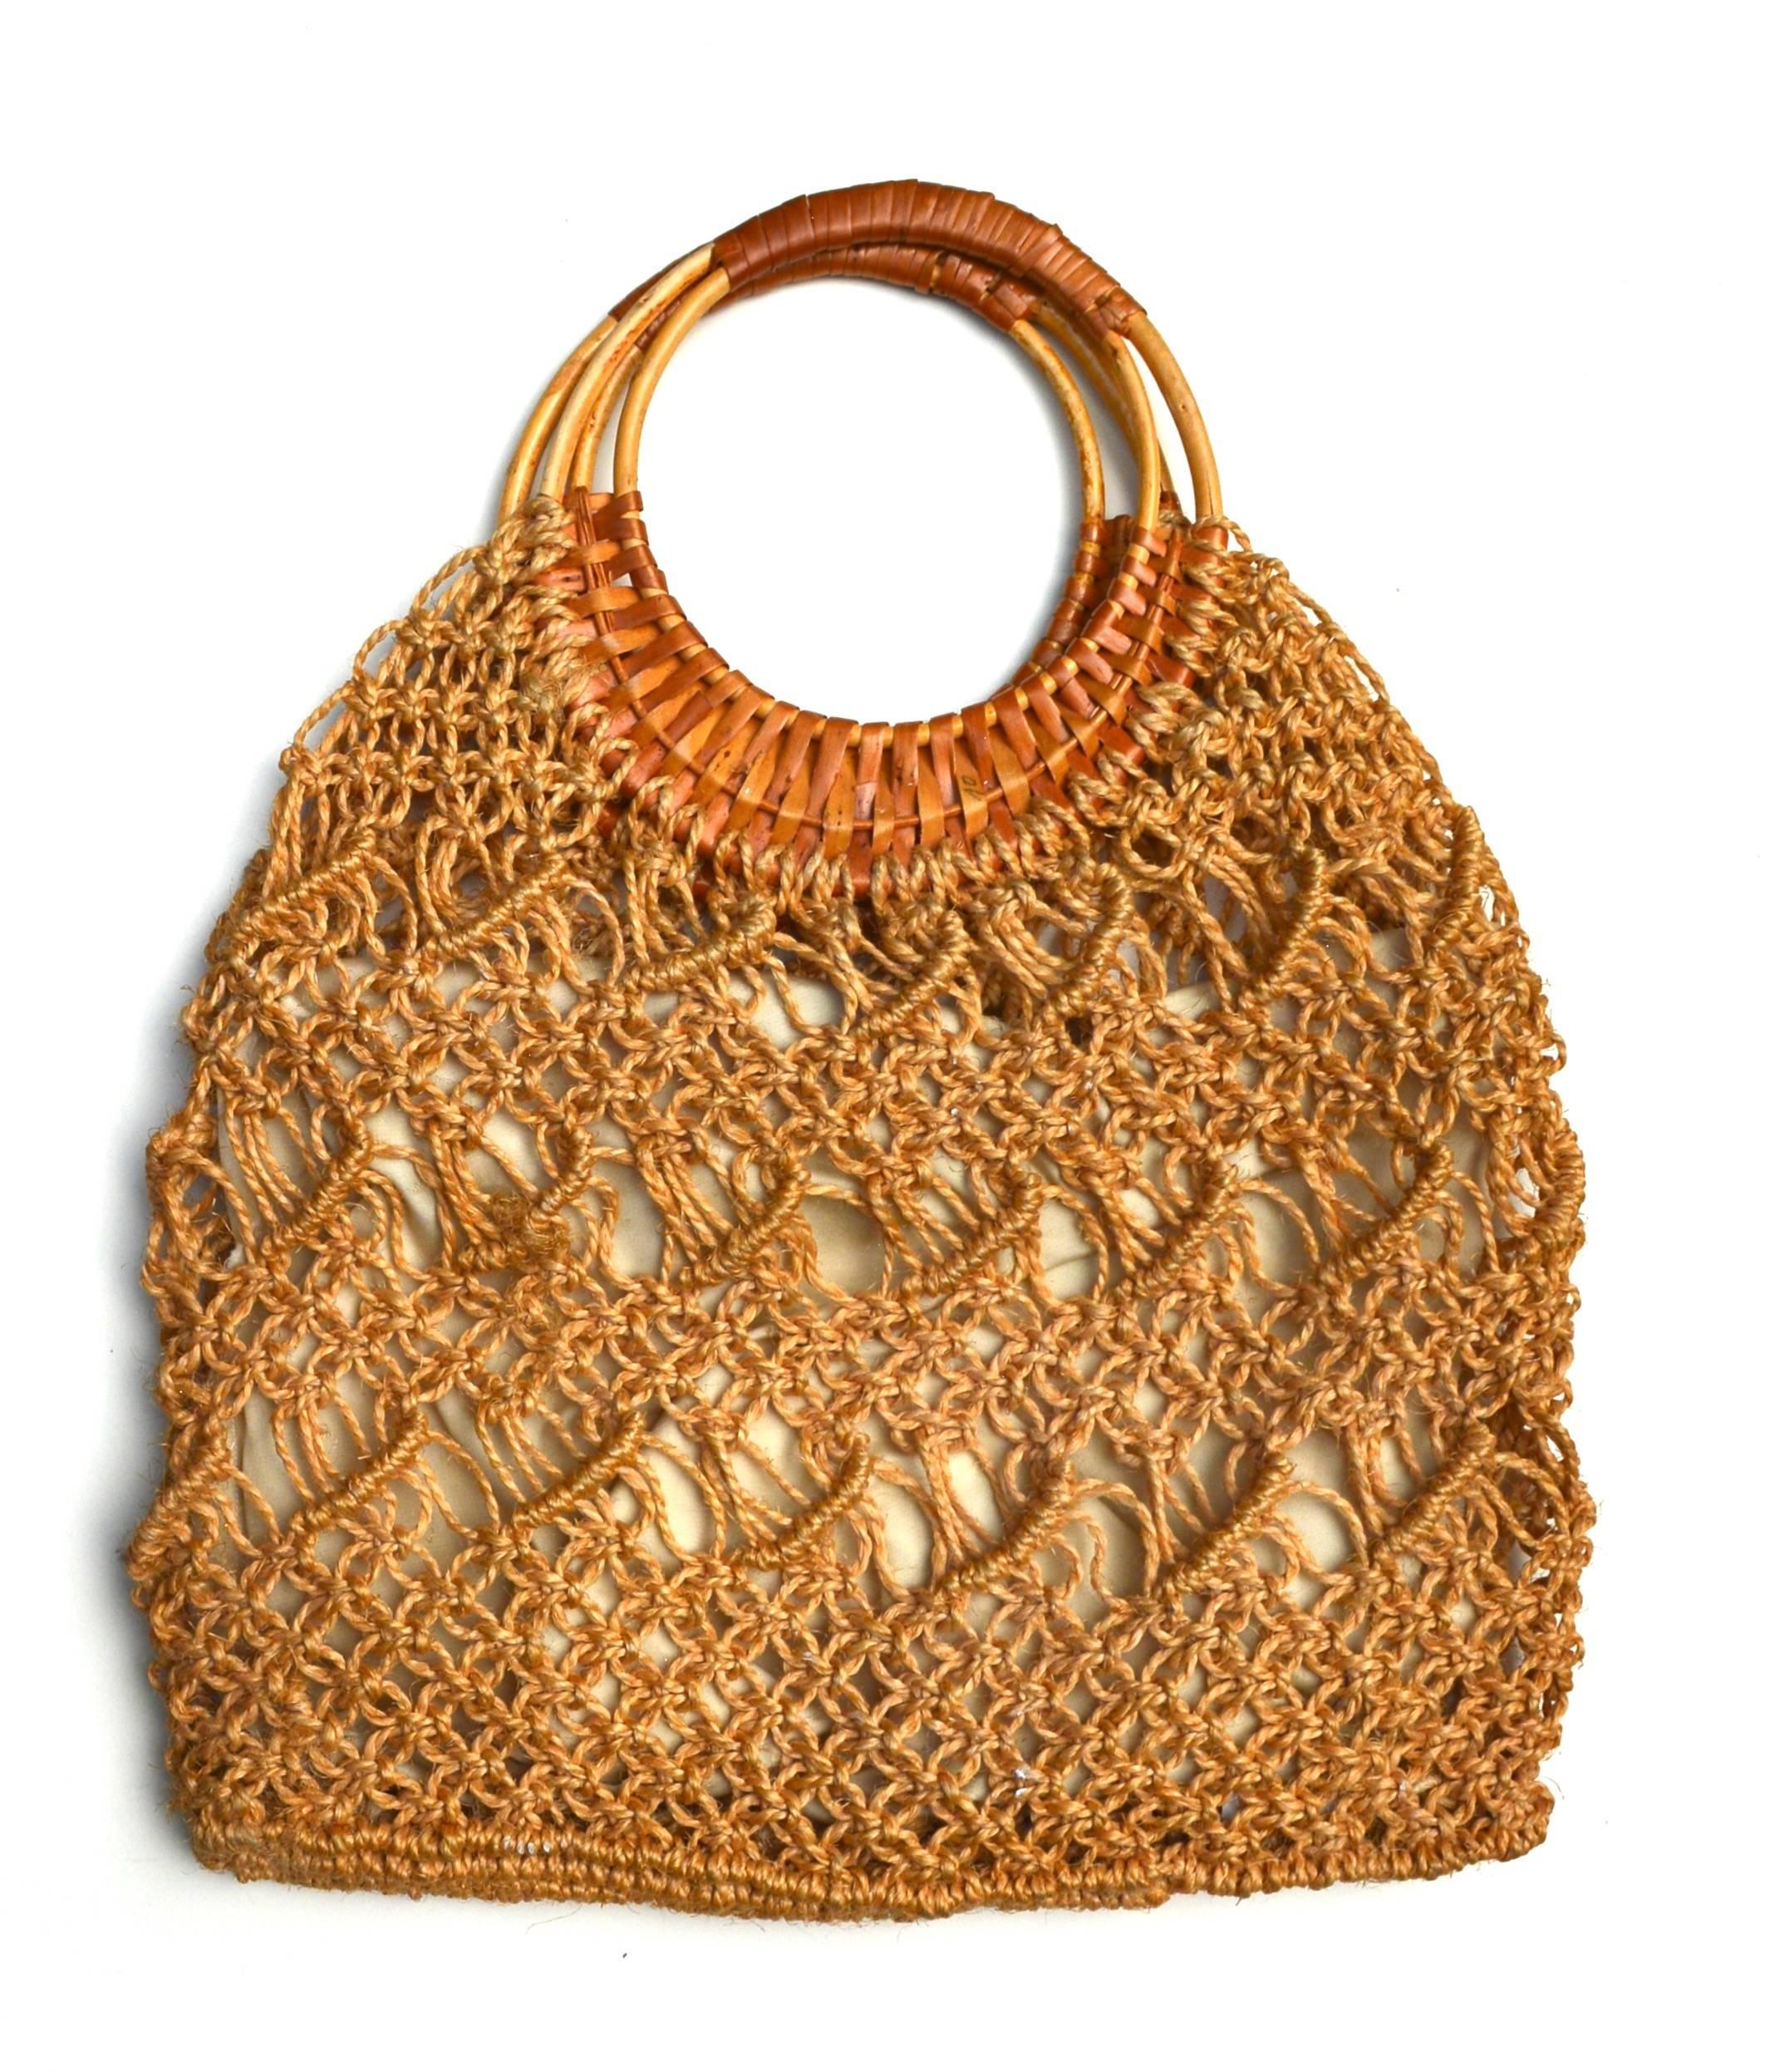 Oversized Macrame bag with cotton lined interior and orange metal zipper. Large wristlet style with an opening of 6